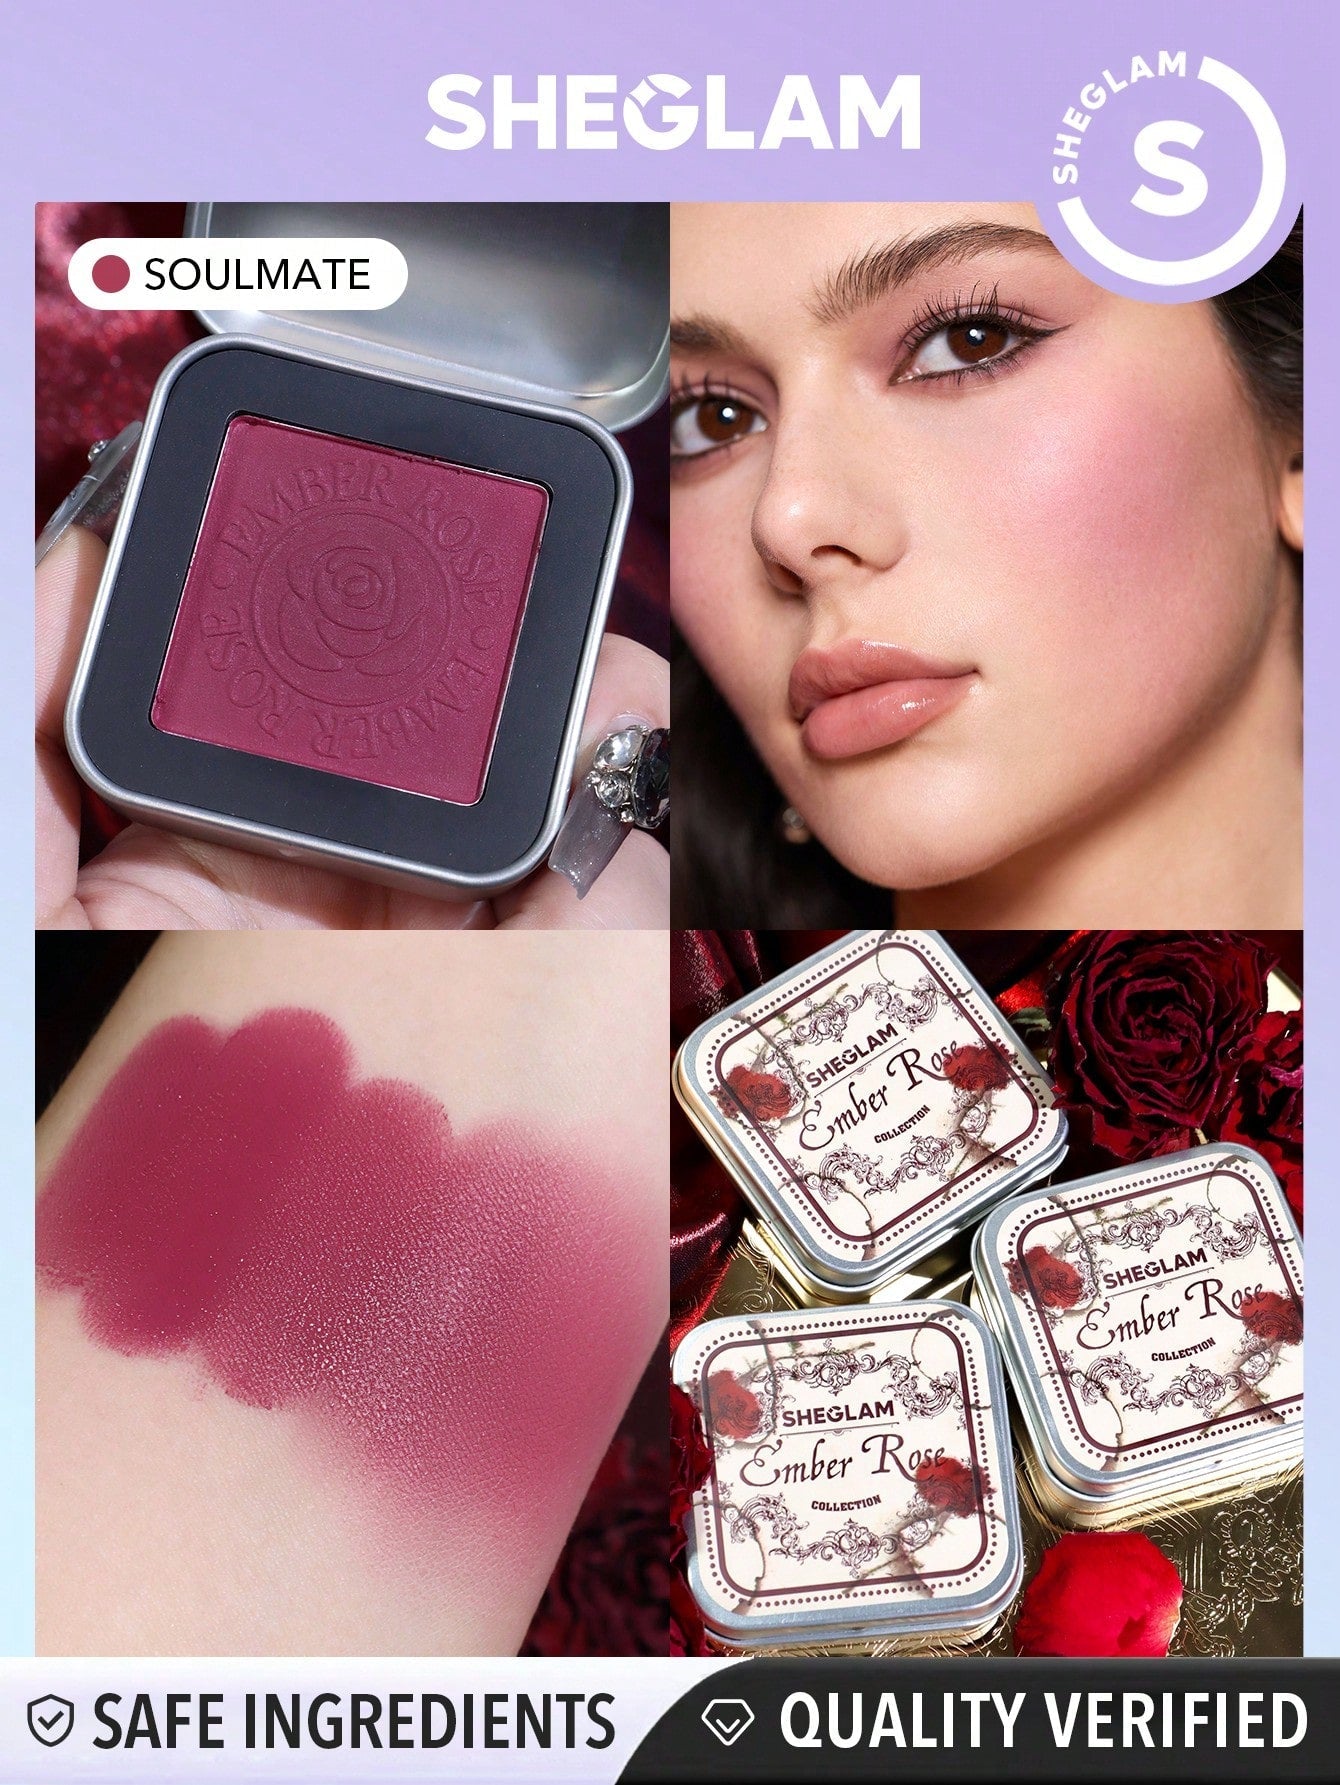 SHEGLAM Ember Rose Eternal Flame Cream, Blush-Cream-To-Powder Blush Palette Highly Pigmented Non-Fading Long Lasting Natural Easy To Use Blush Box - Negative Apparel